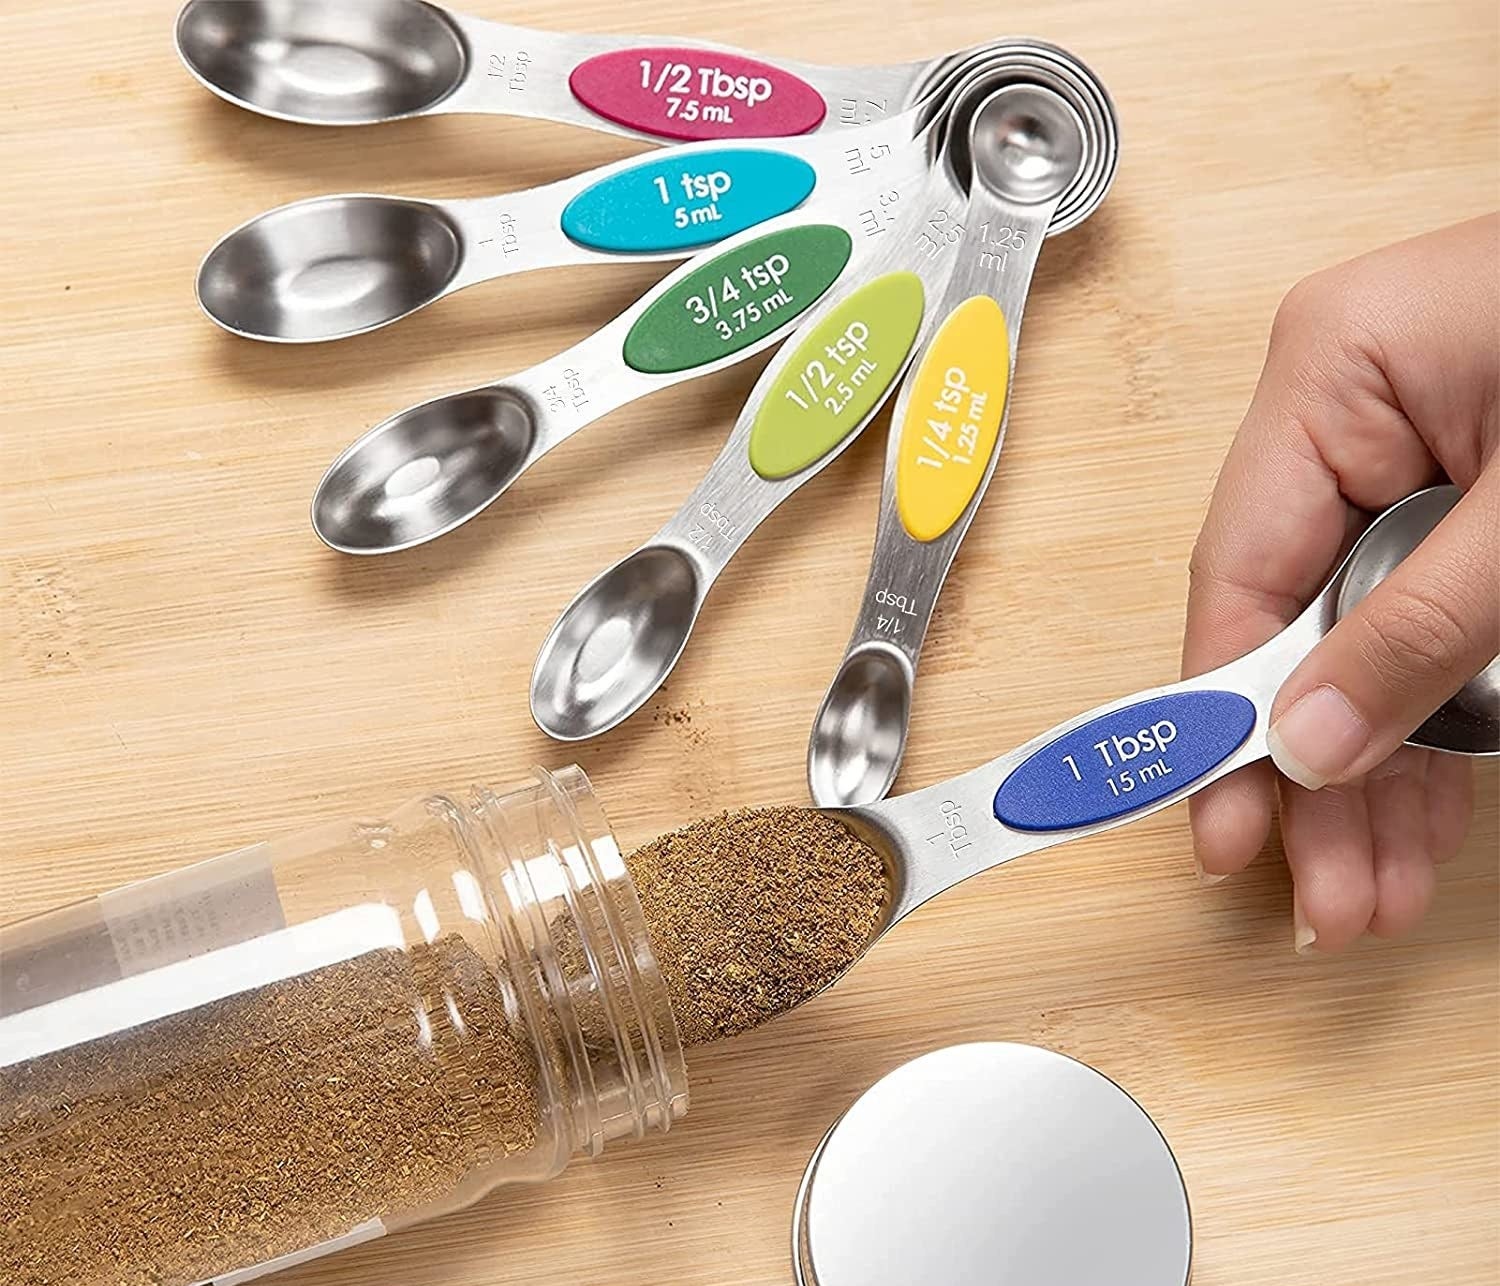 person measuring out spices on a measuring spoon